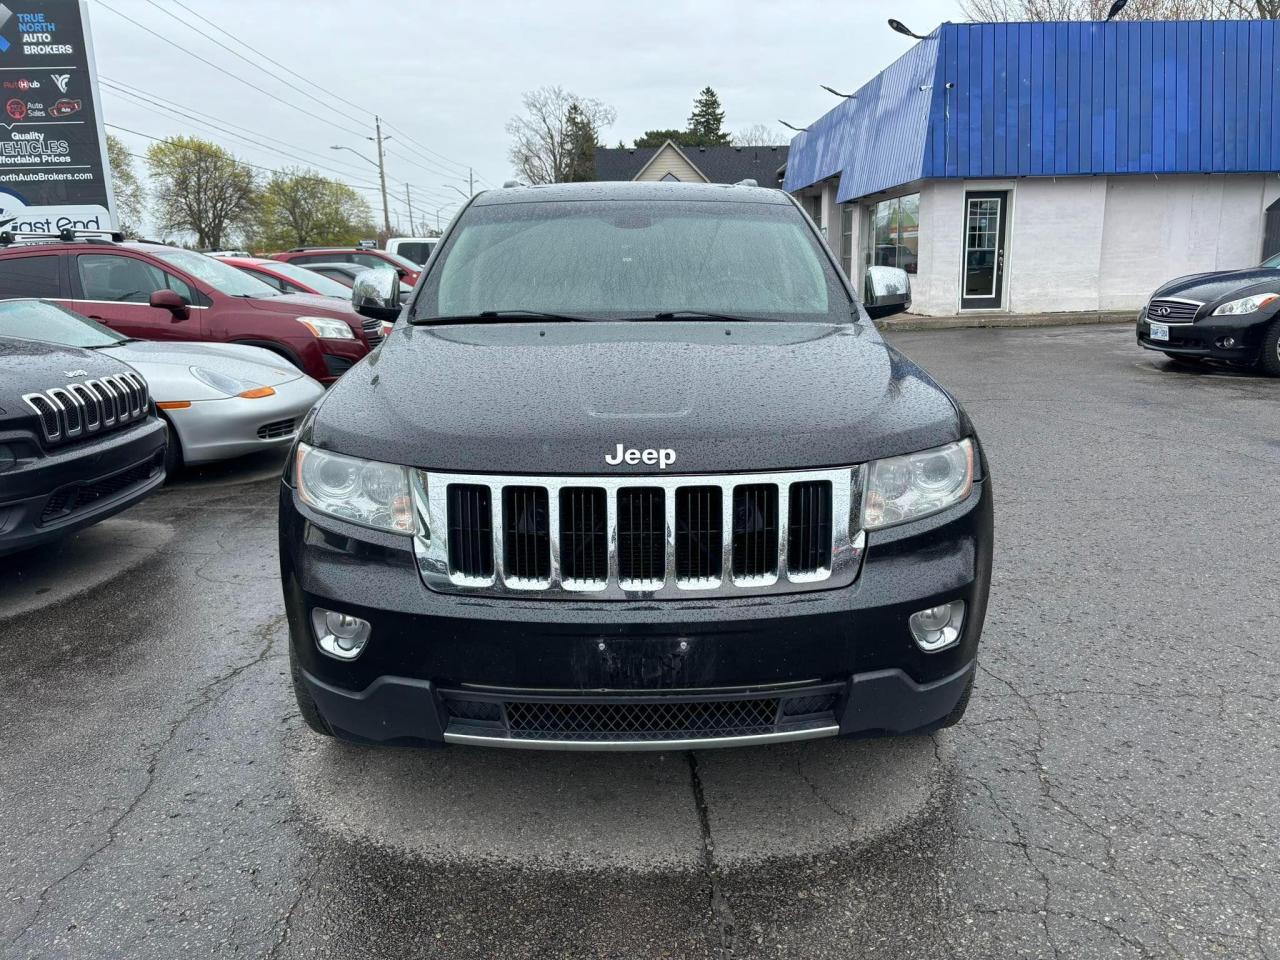 2011 Jeep Grand Cherokee 4WD 4Dr Limited - Photo #2